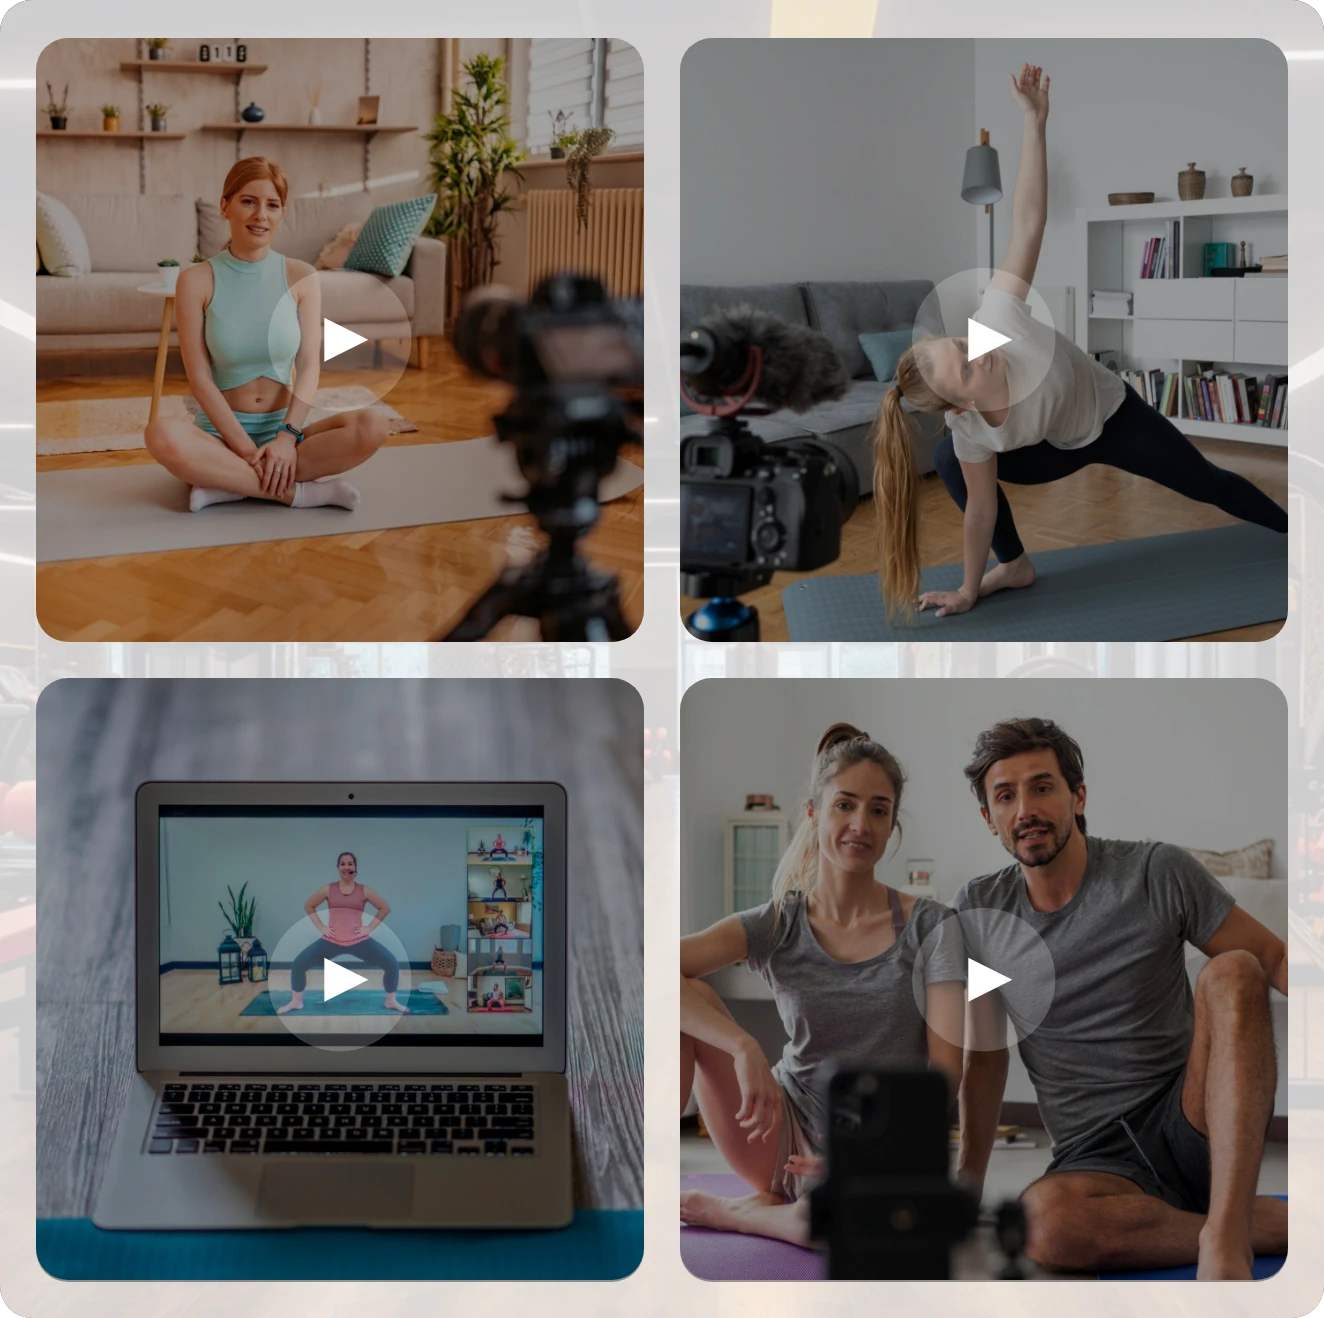 Yoga studio software with complete control of video-on-demand feature